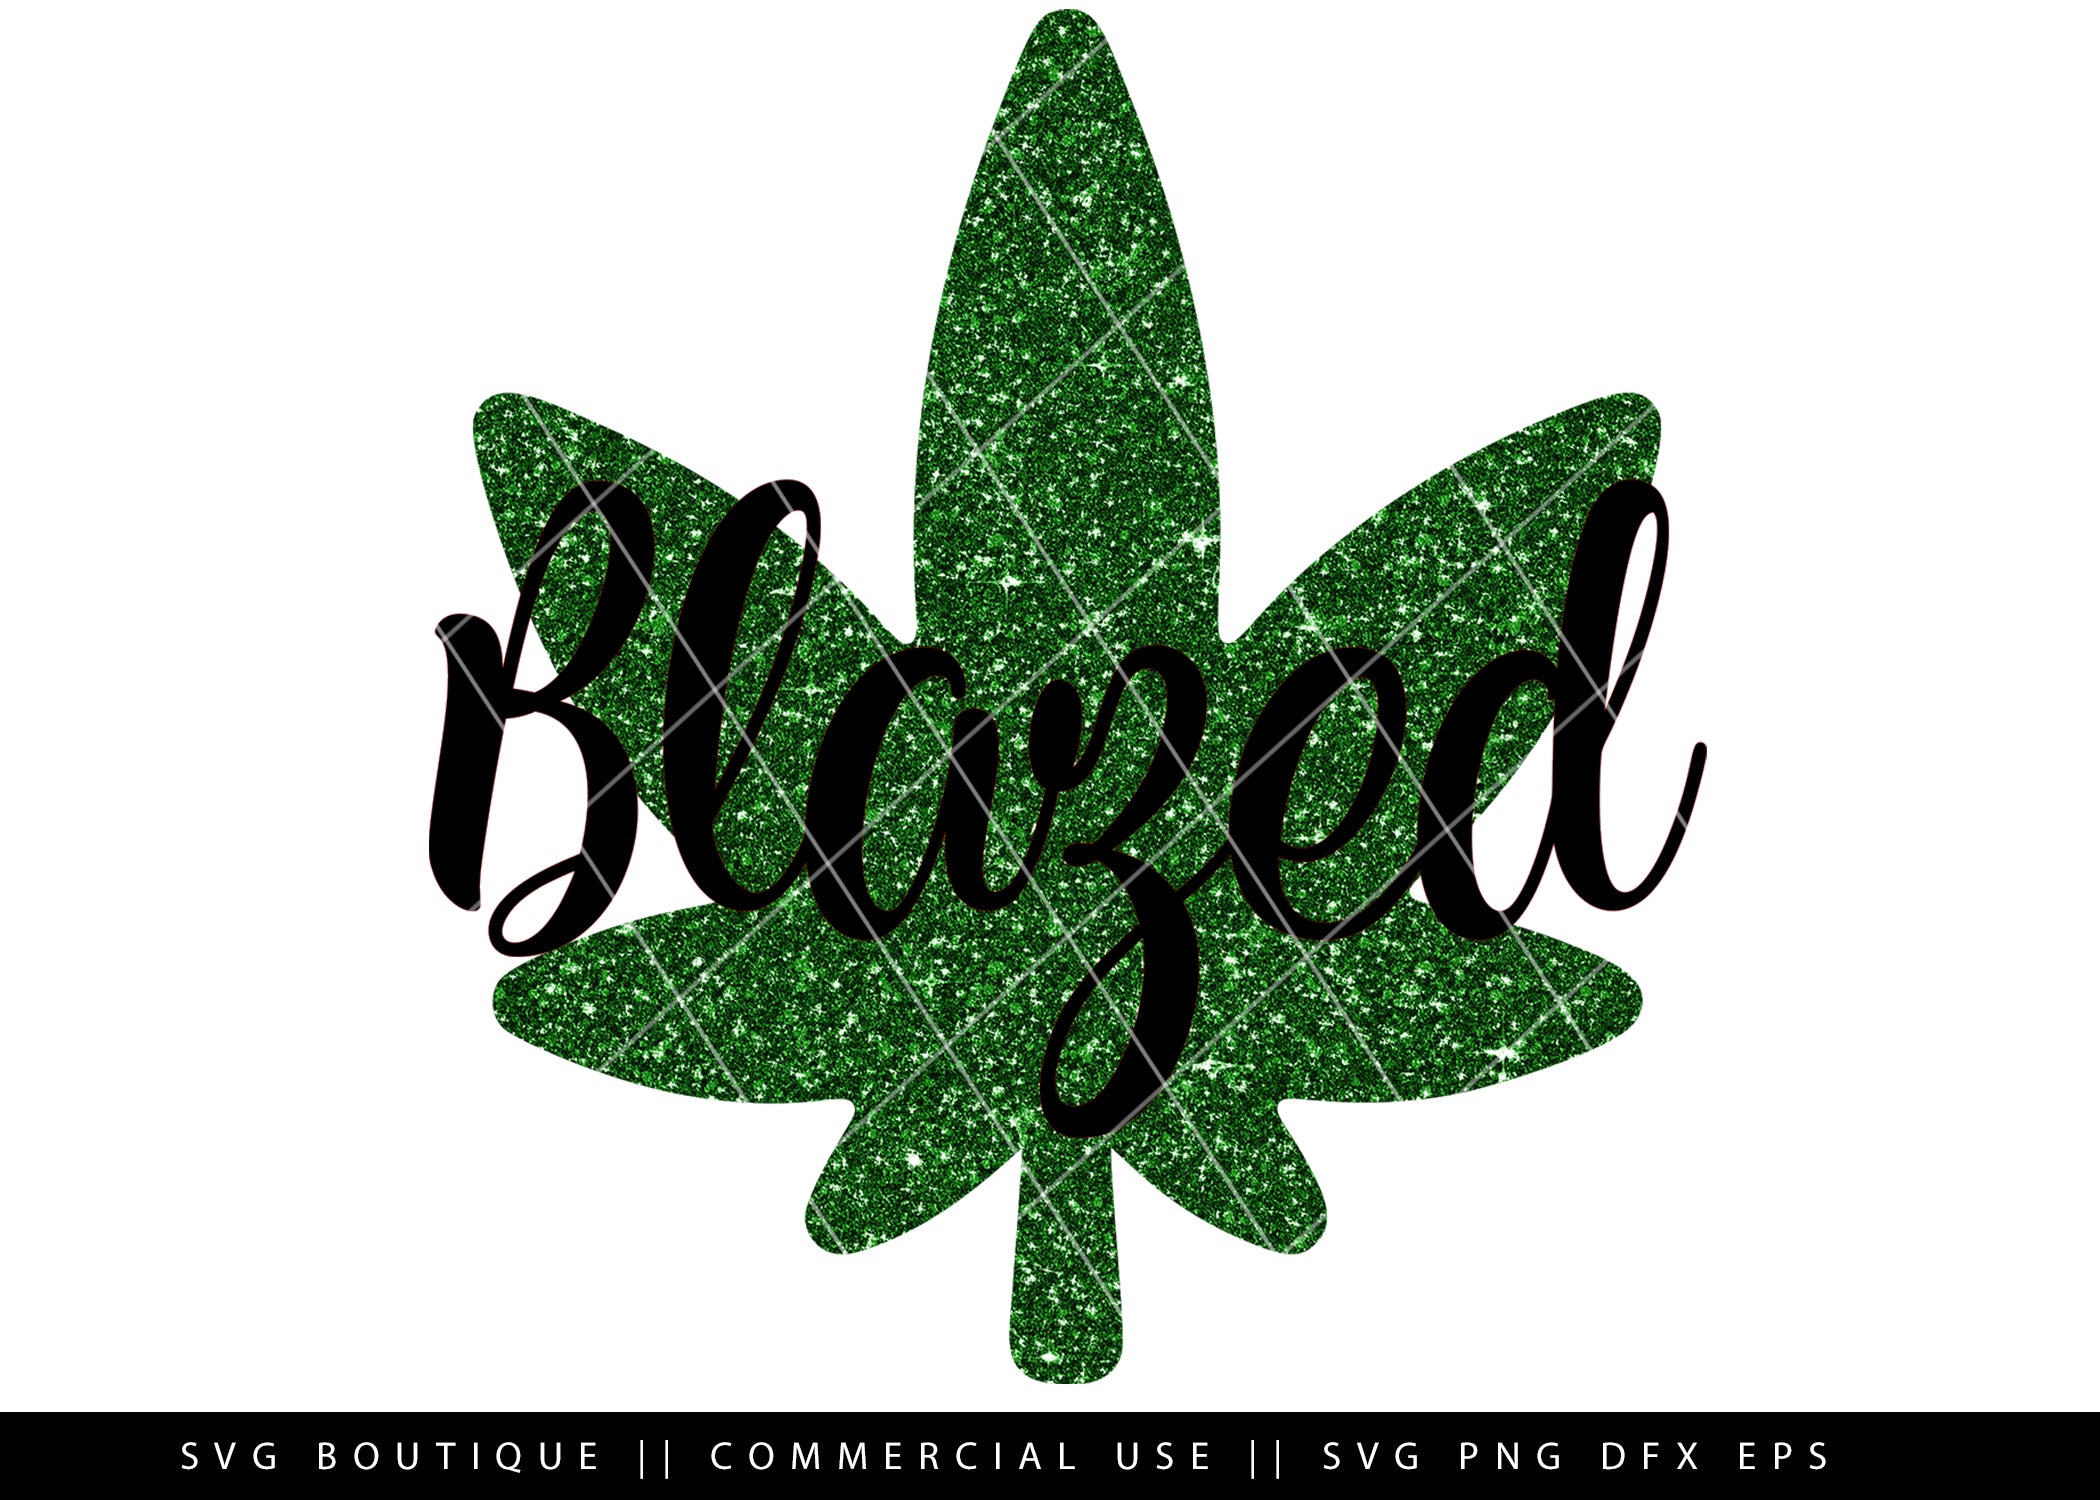 Download Blazed - Weed/Dope SVG Files - Cut File For Silhouette and Cricut Cutt - SVG BOUTIQUE